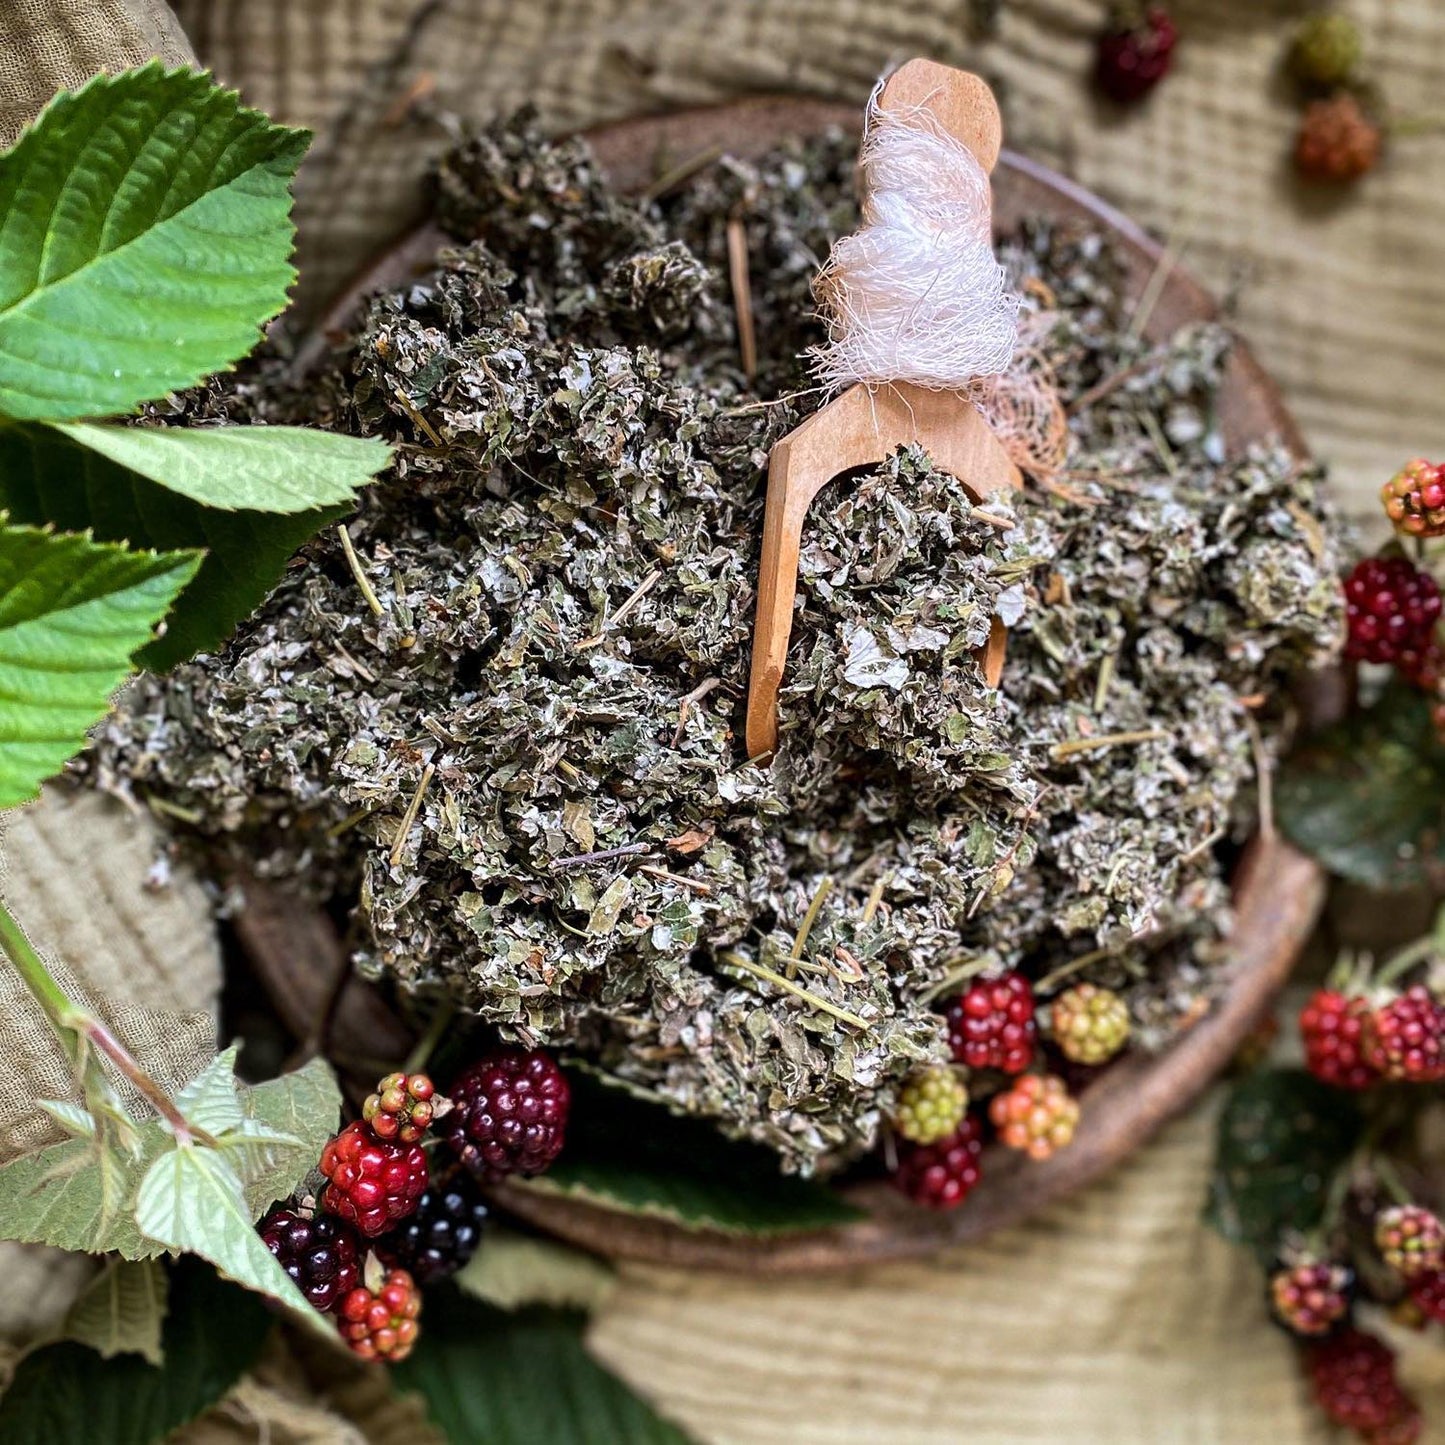 Dried red raspberry leaves in a wooden bowl with a wooden scoop that is surrounded by fresh berries.